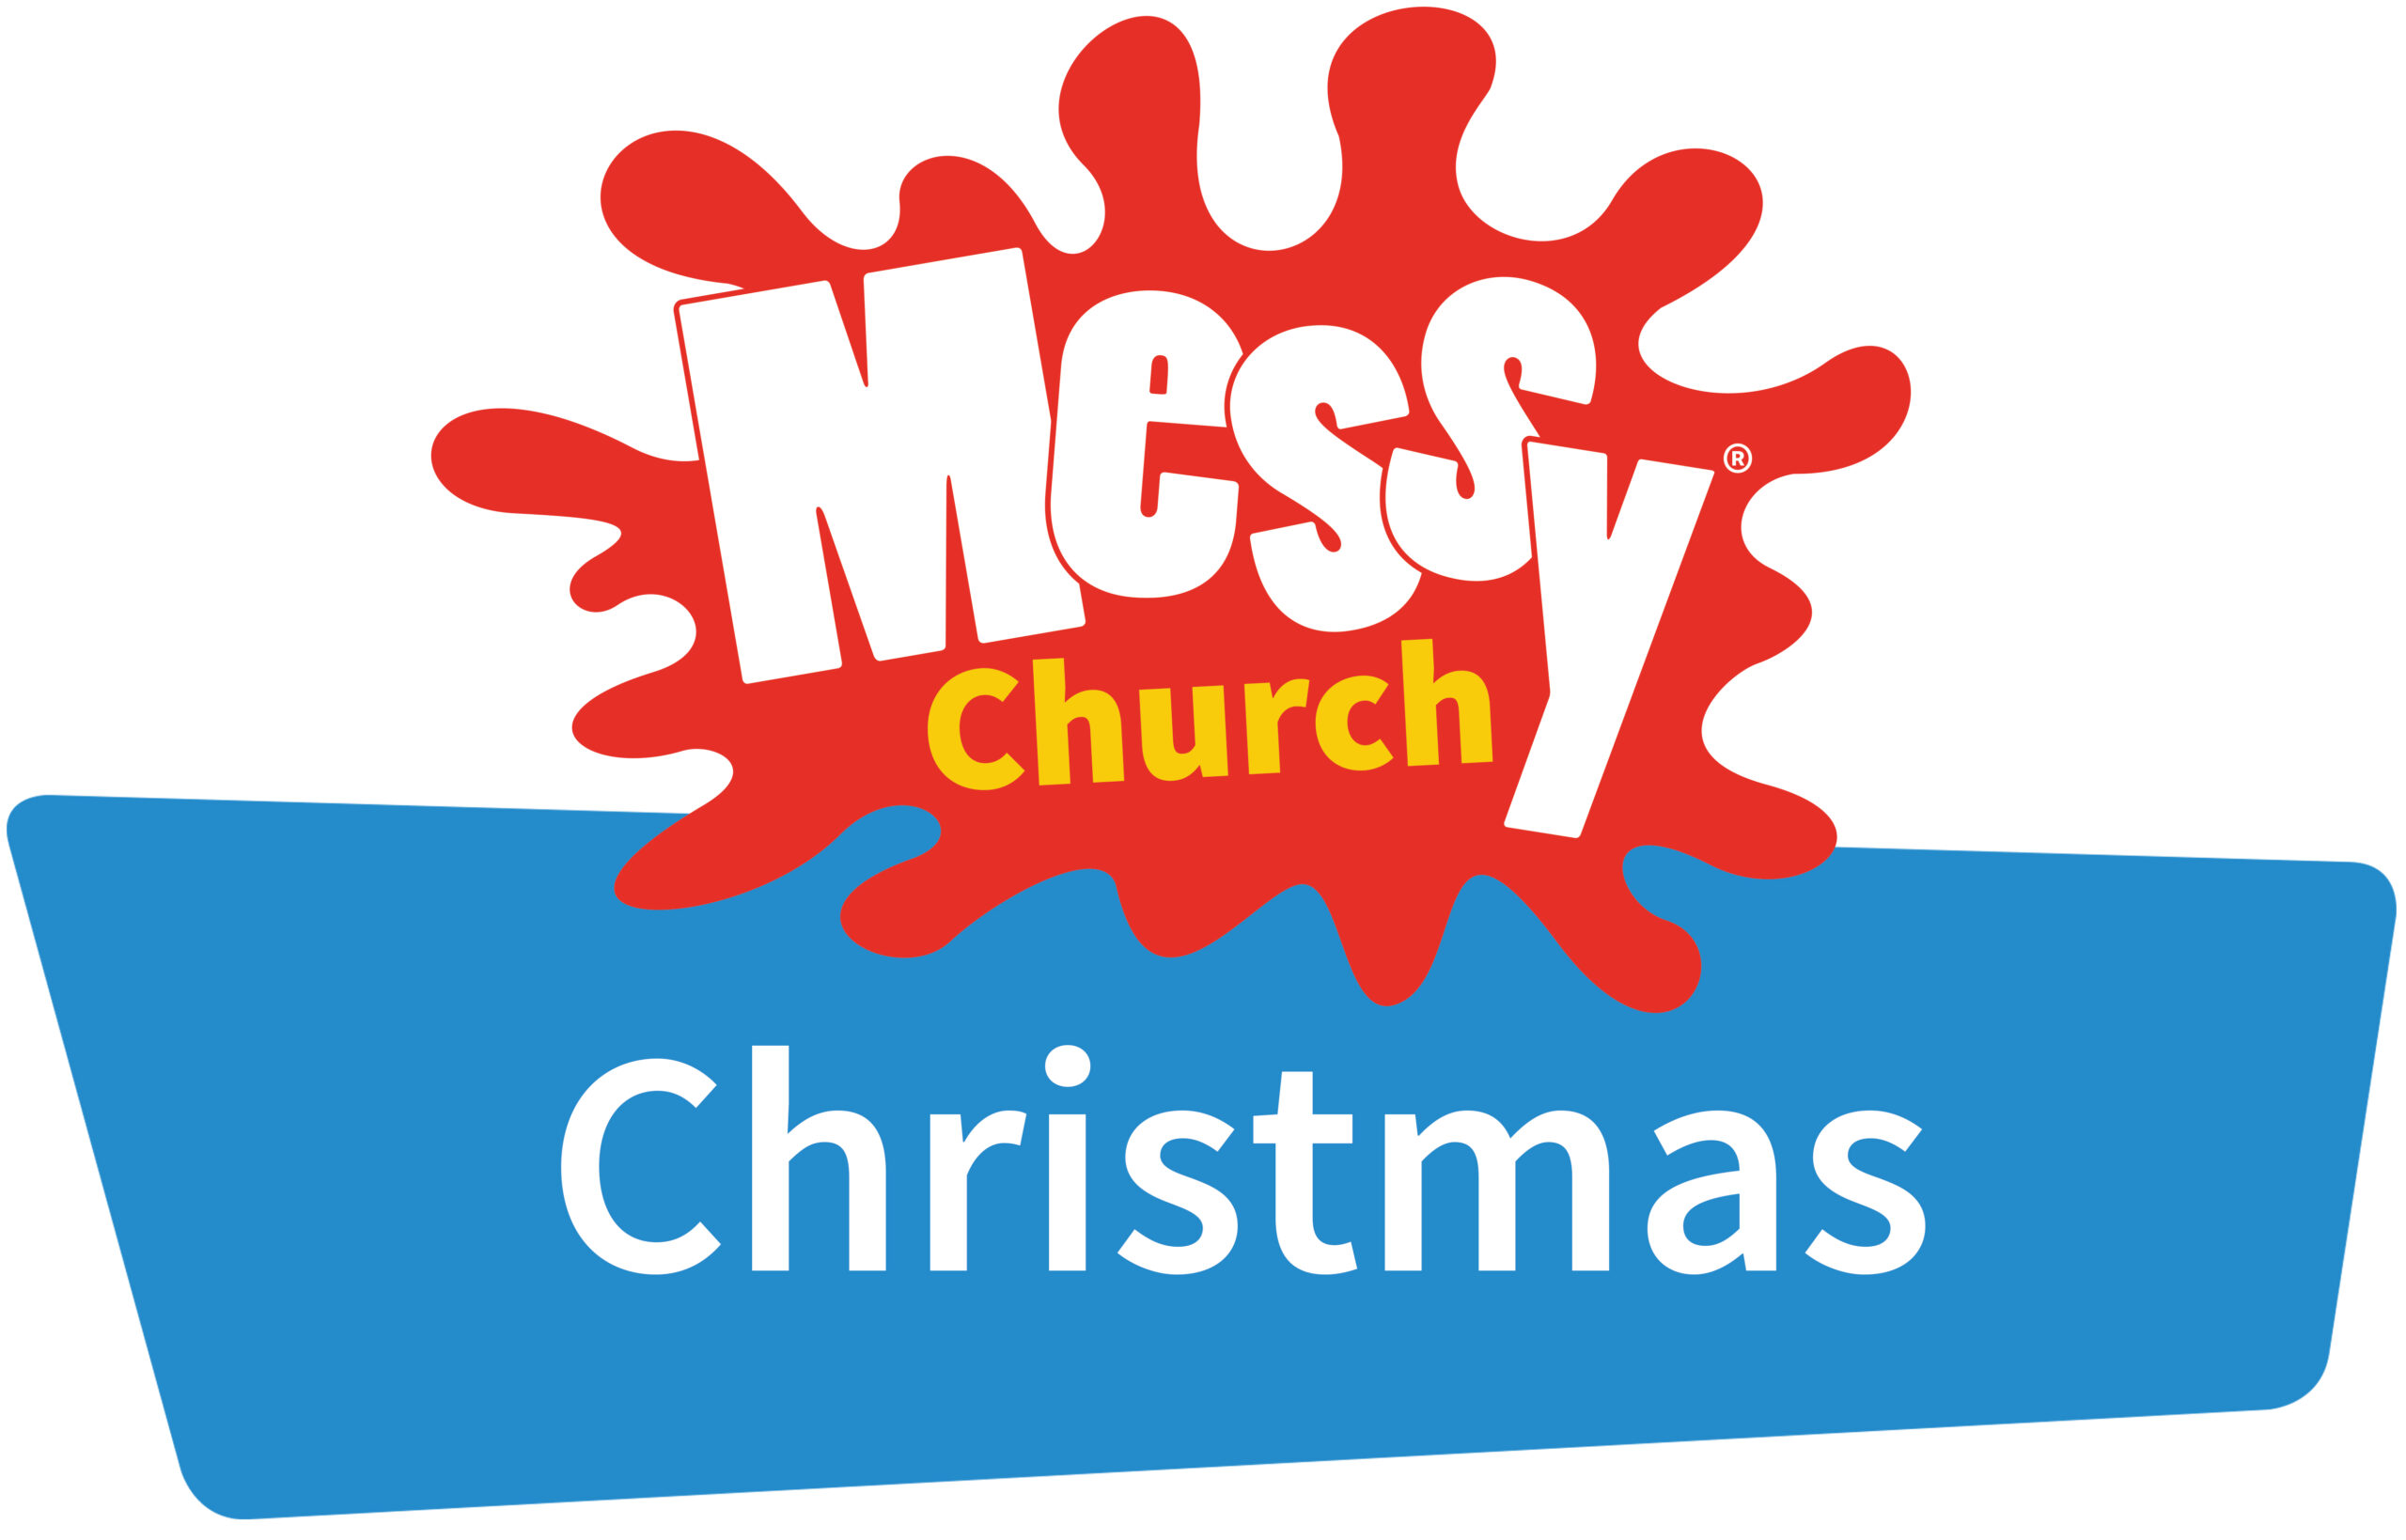 Messy Church at Christmas – Now Online Thursday 23rd December, 2.30 pm